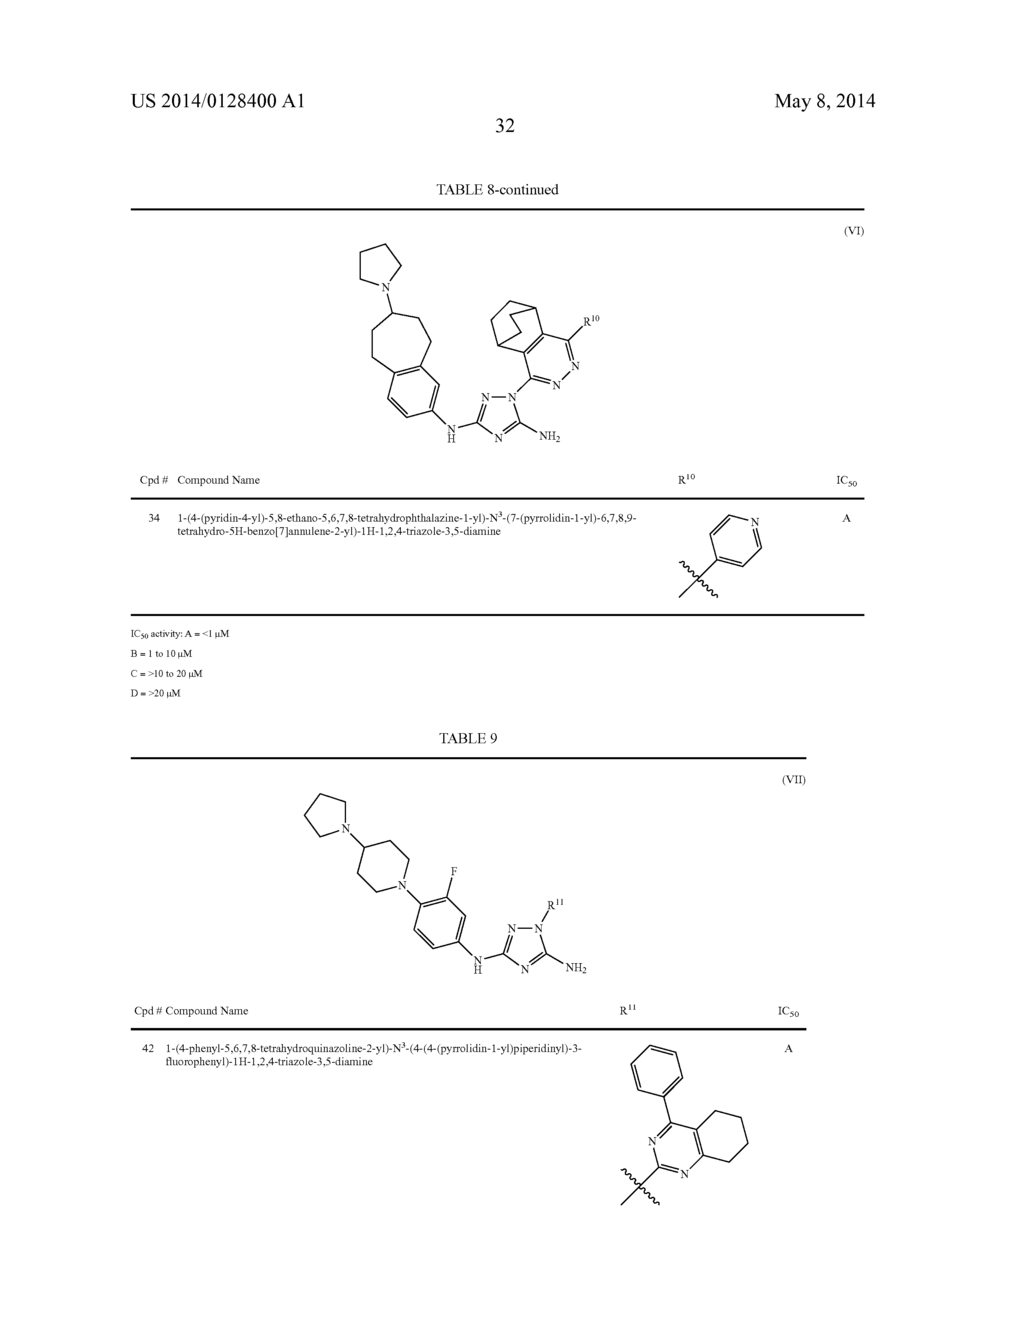 BRIDGED BICYCLIC HETEROARYL SUBSTITUTED TRIAZOLES USEFUL AS AXL INHIBITORS - diagram, schematic, and image 33